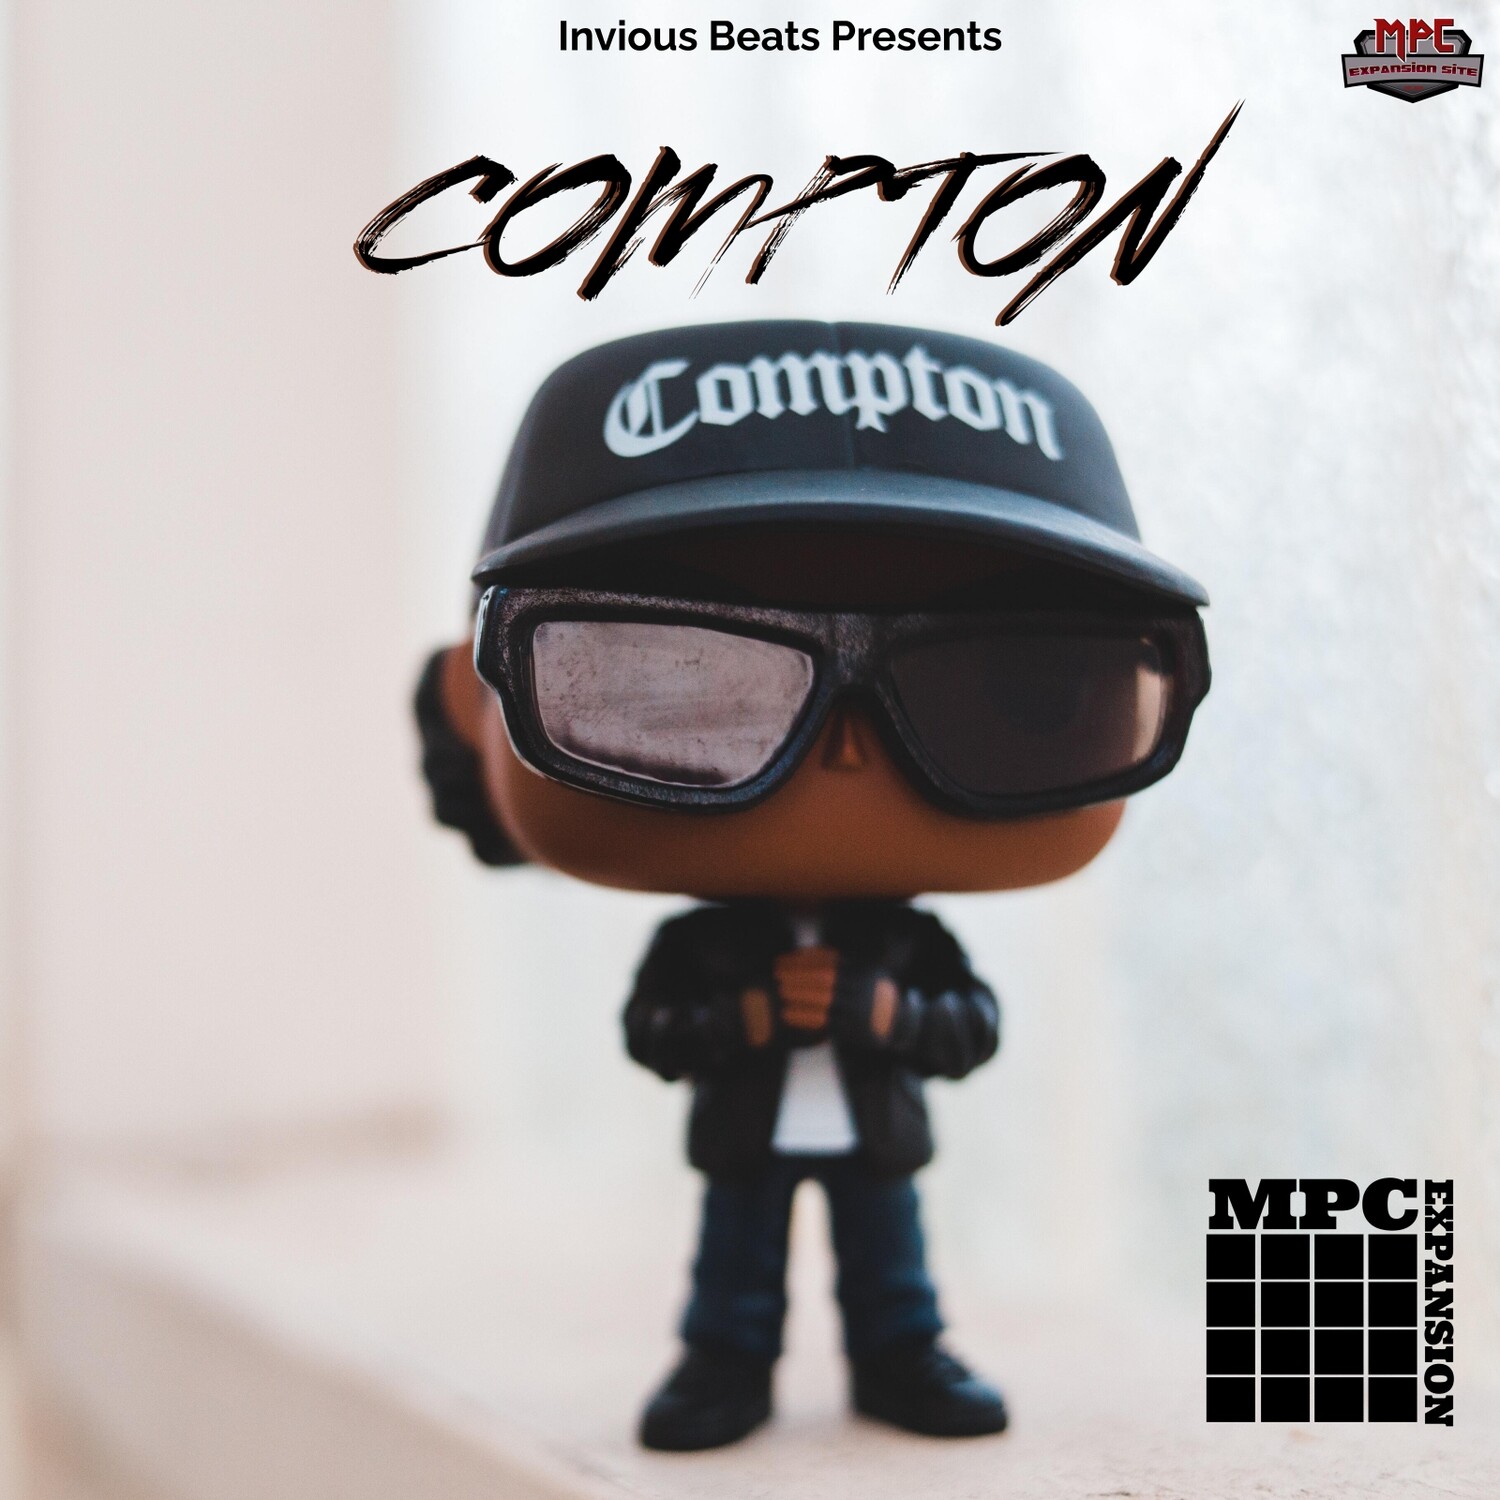 MPC EXPANSION 'COMPTON' by INVIOUS